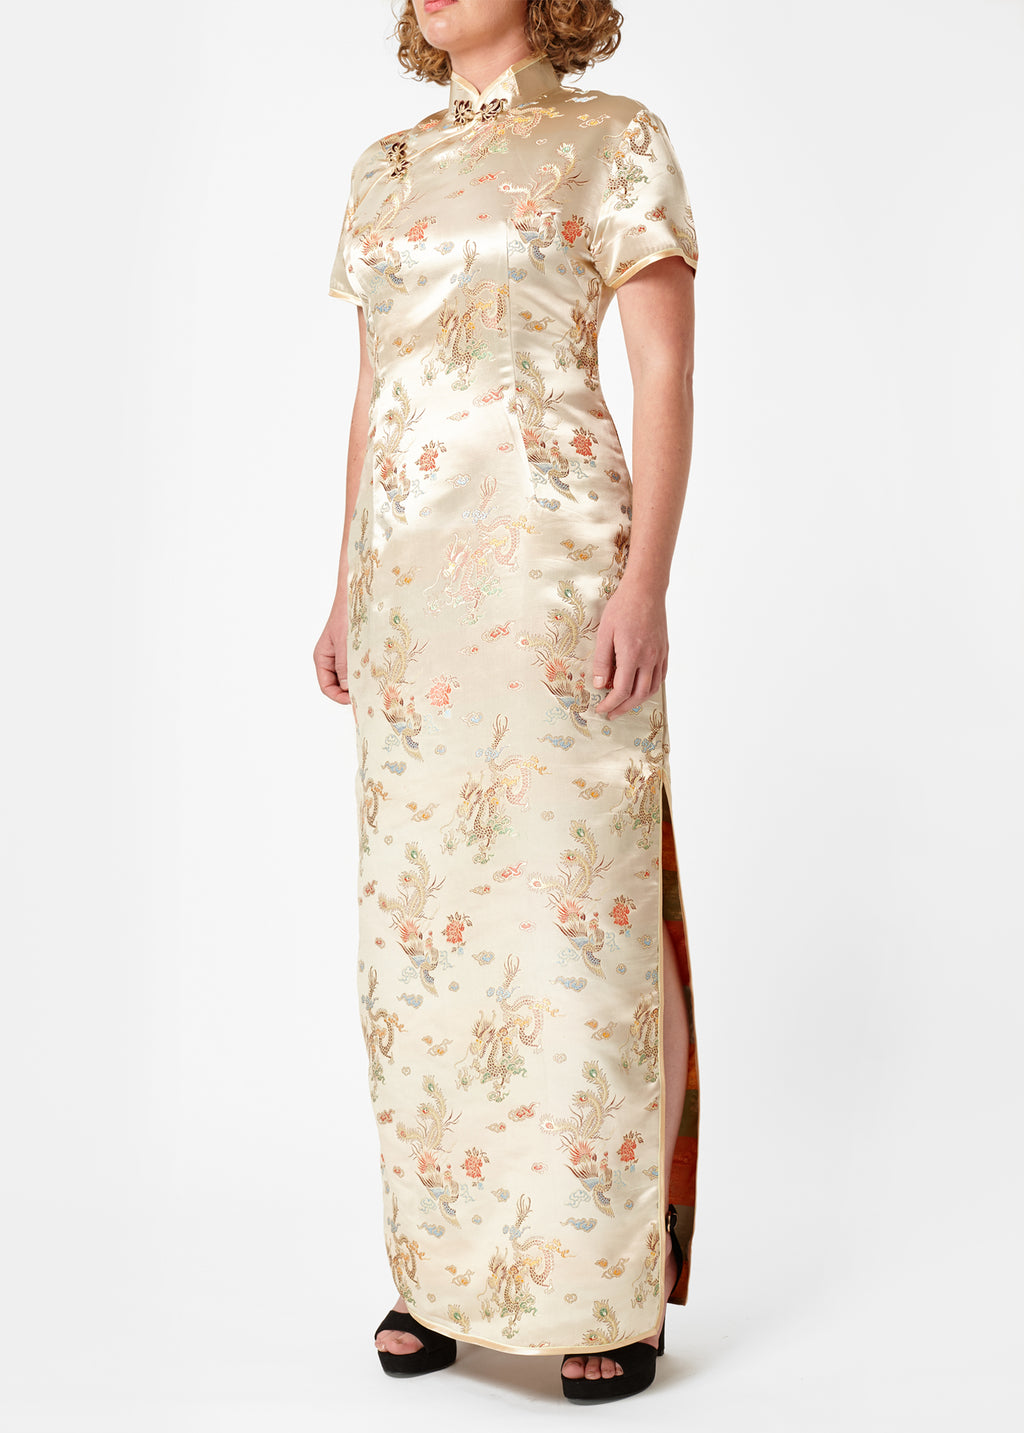 The Cheongsam or Qipao, is a feminine body-hugging dress with distinctive Chinese features of mandarin collar, side splits and hand stitched flower and knot frog fastenings. Manufactured in authentic high quality silk/rayon brocade in a classic gold dragon and phoenix design - a symbol success and prosperity